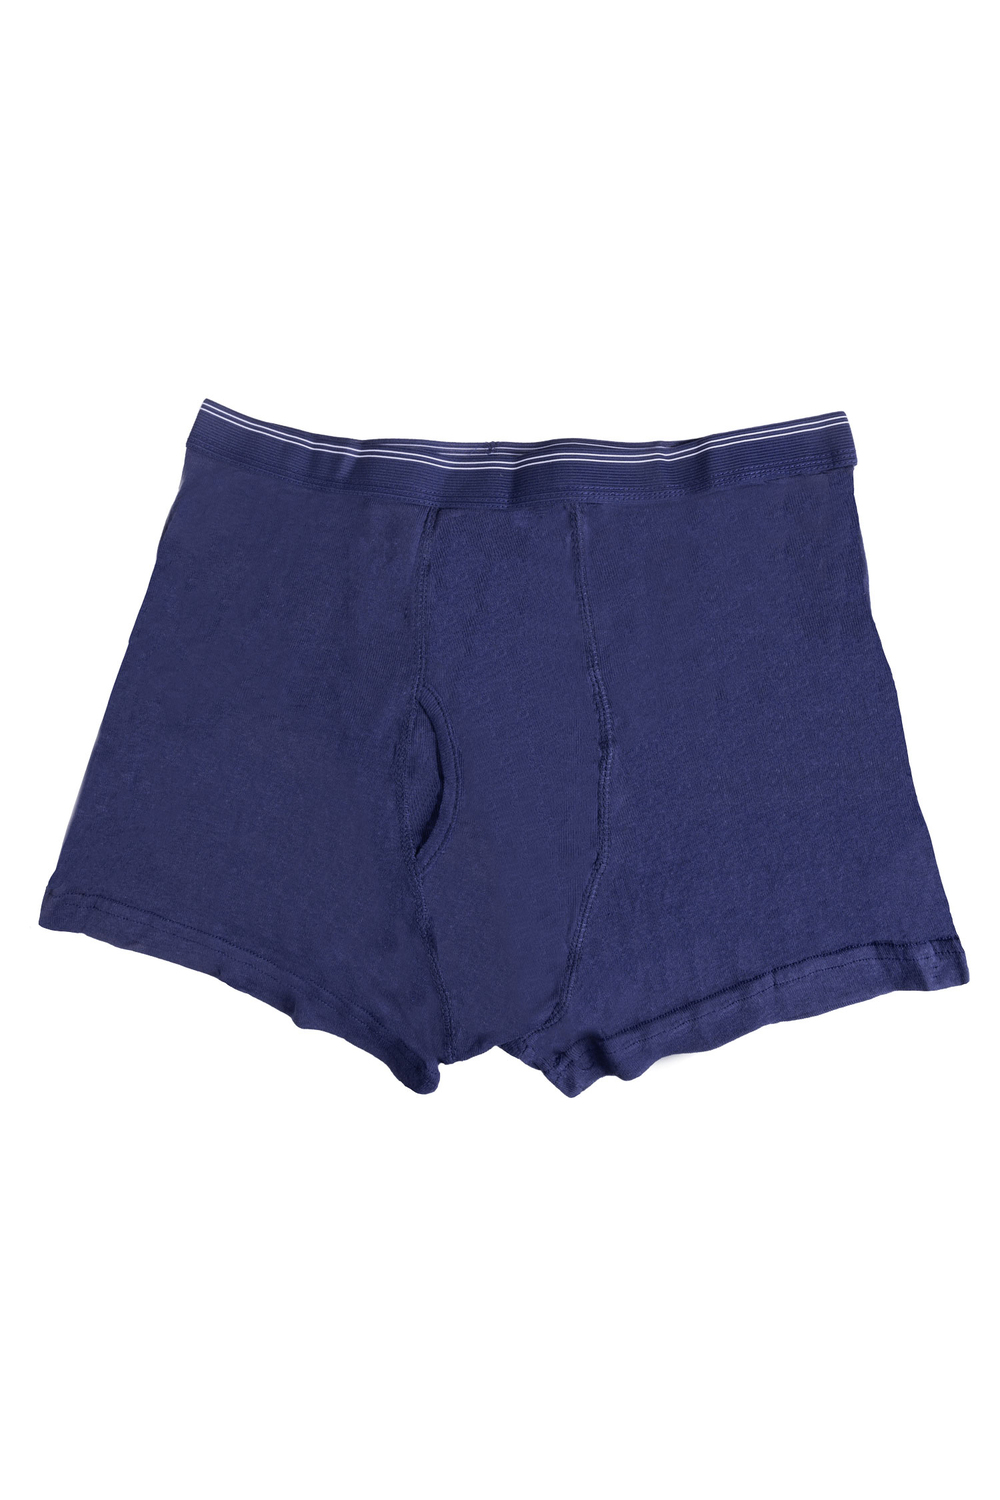 https://www.rossy.ca/media/A2W/products/essentials-by-7-apparel-boxer-briefs-pk-of-3-76754-3.jpg